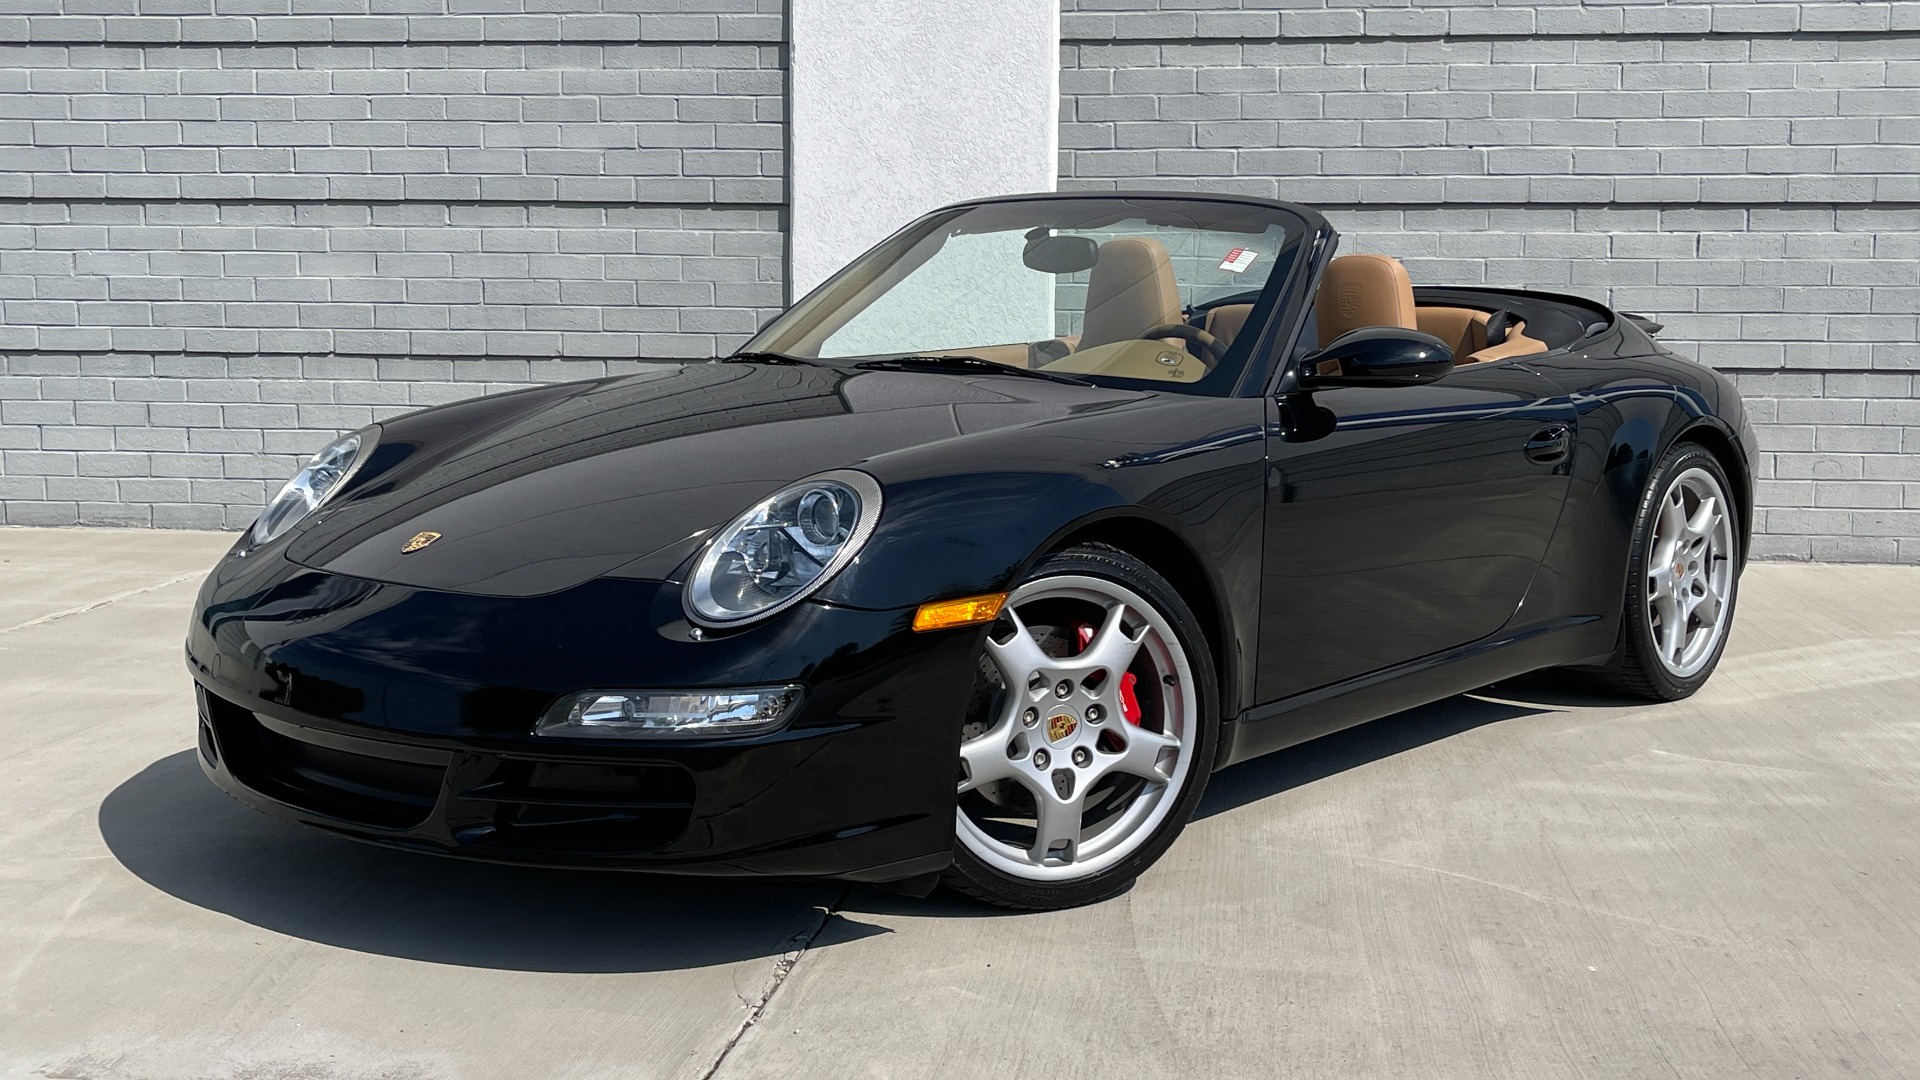 Used 2006 Porsche 911 CARRERA S CABRIOLET / BOSE / CD CHANGER / PWR SEAT PKG / HTD STS for sale $60,999 at Formula Imports in Charlotte NC 28227 7